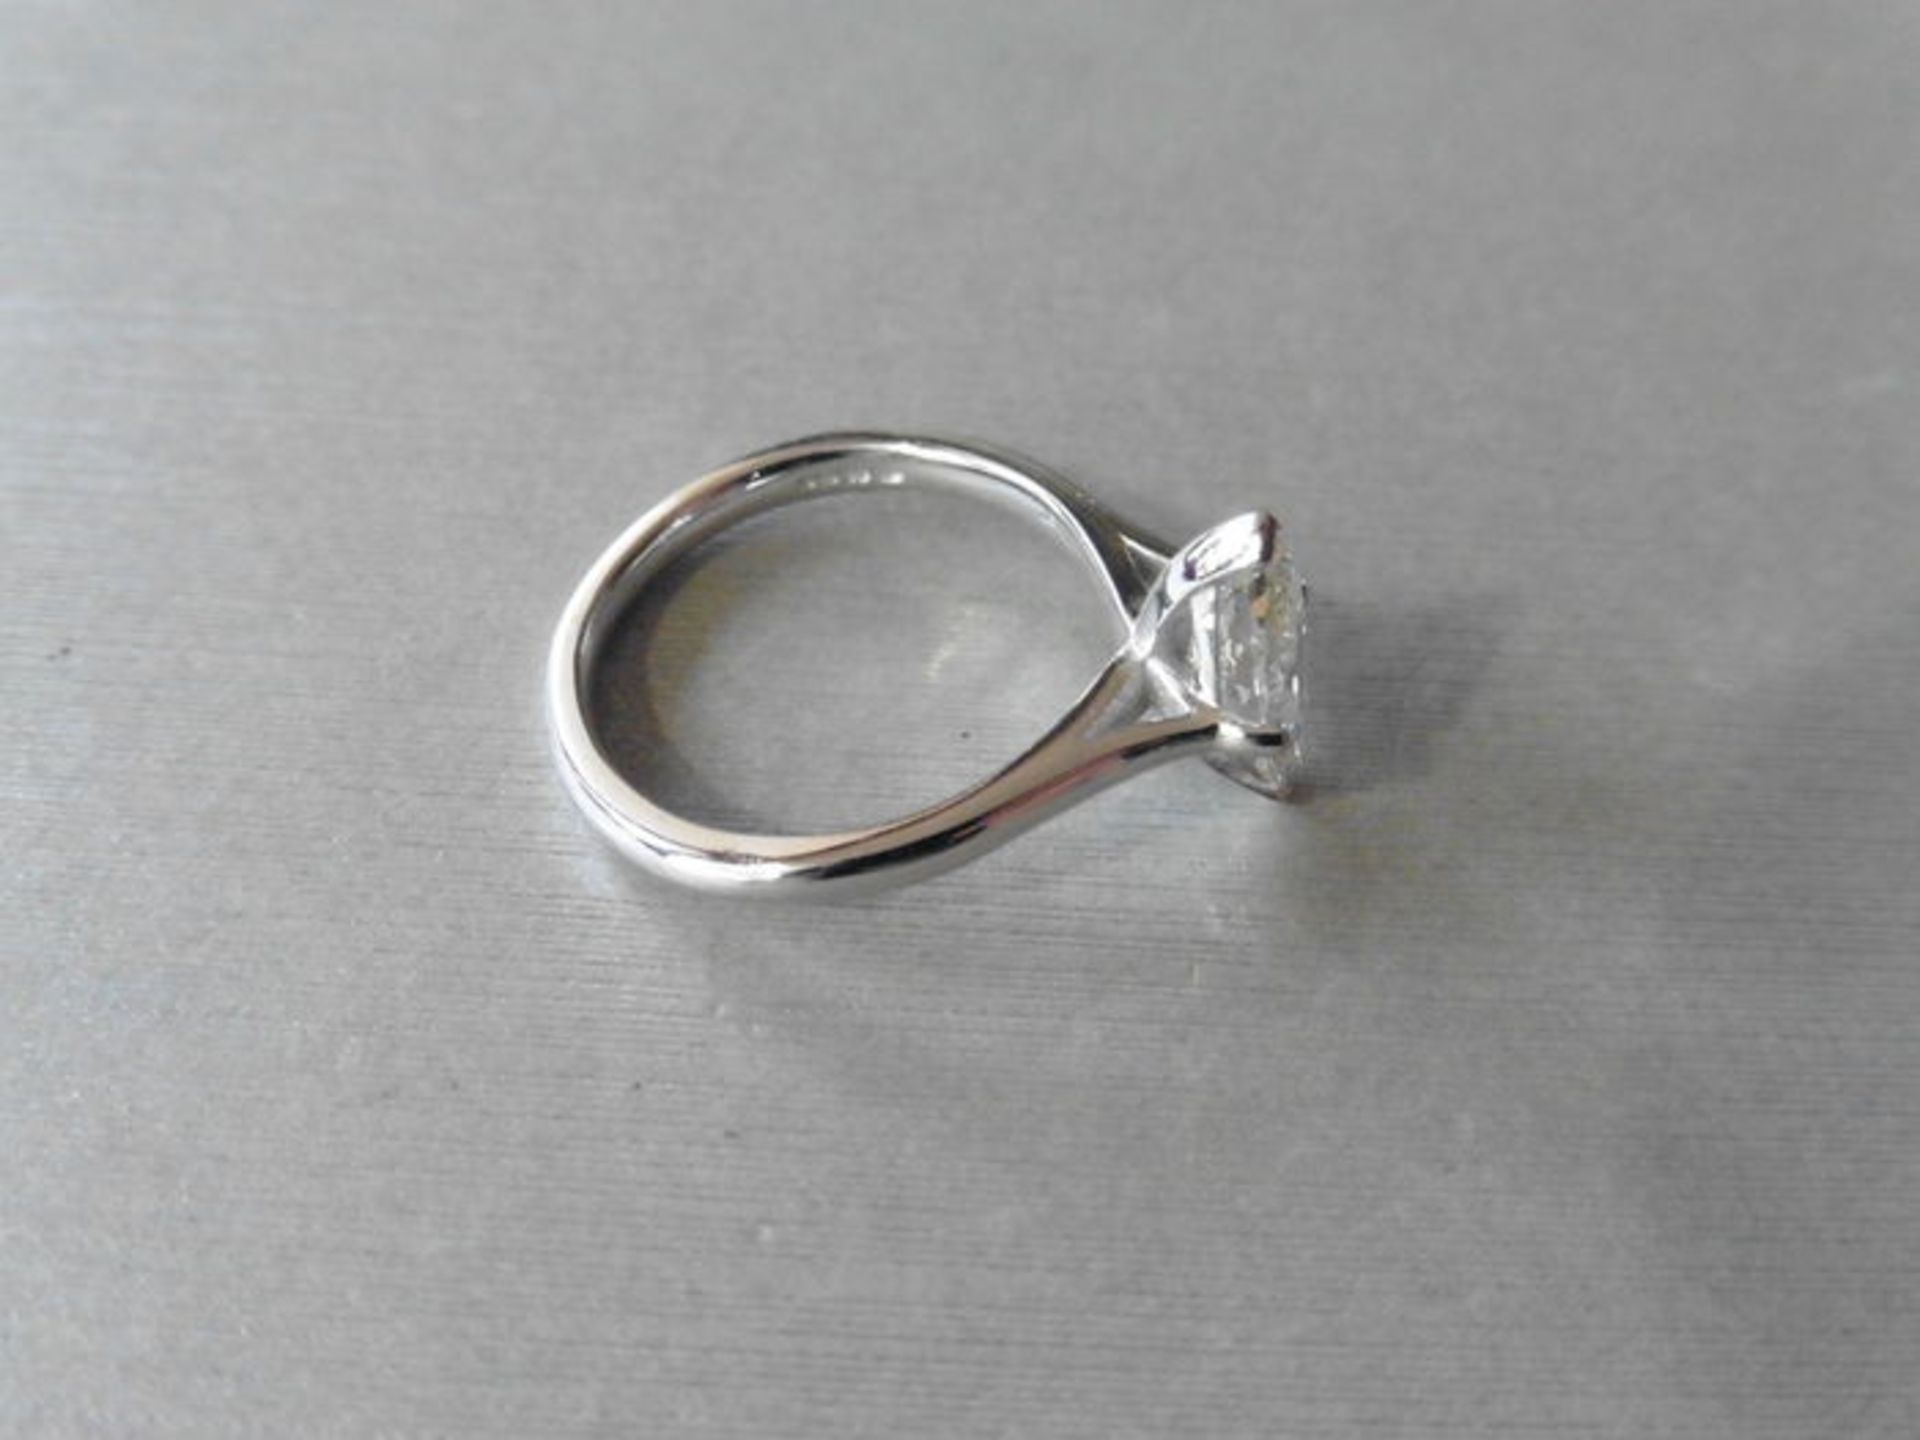 2.45ct marquis natural diamond,si2 clarity K colour,18ct white gold setting 3.9gms,uk size L, - Image 3 of 3